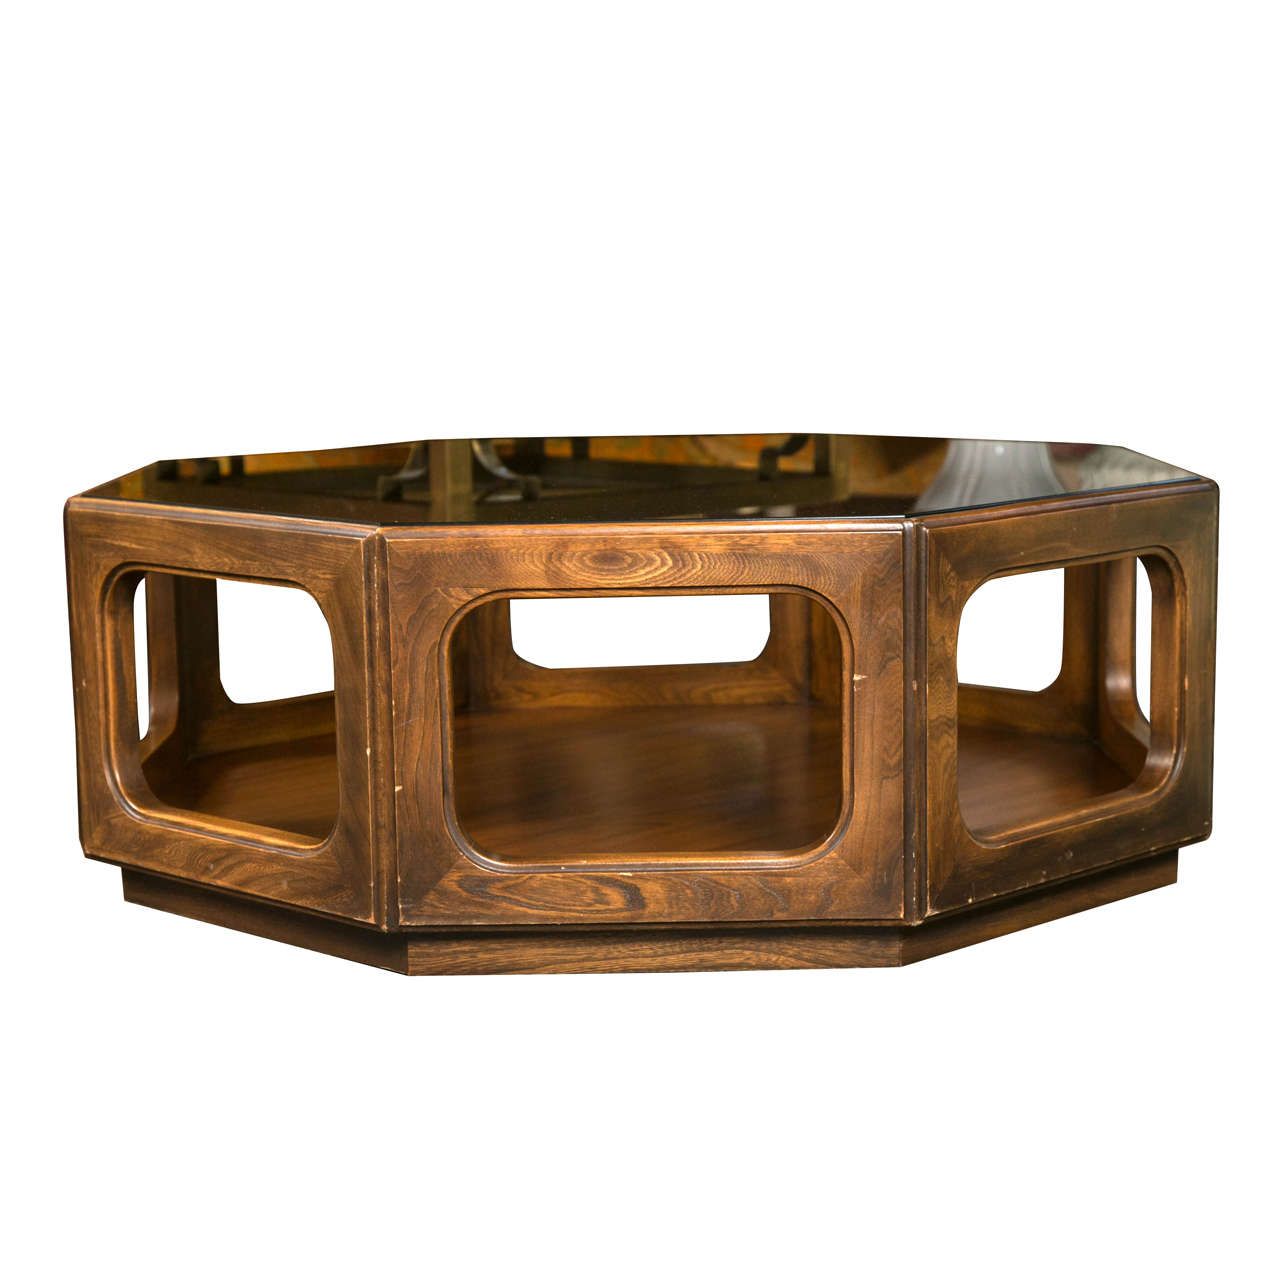 Famous Octagon Coffee Tables Inside Octagonal Midcentury Glass Top Coffee Table For Sale At (Gallery 19 of 20)